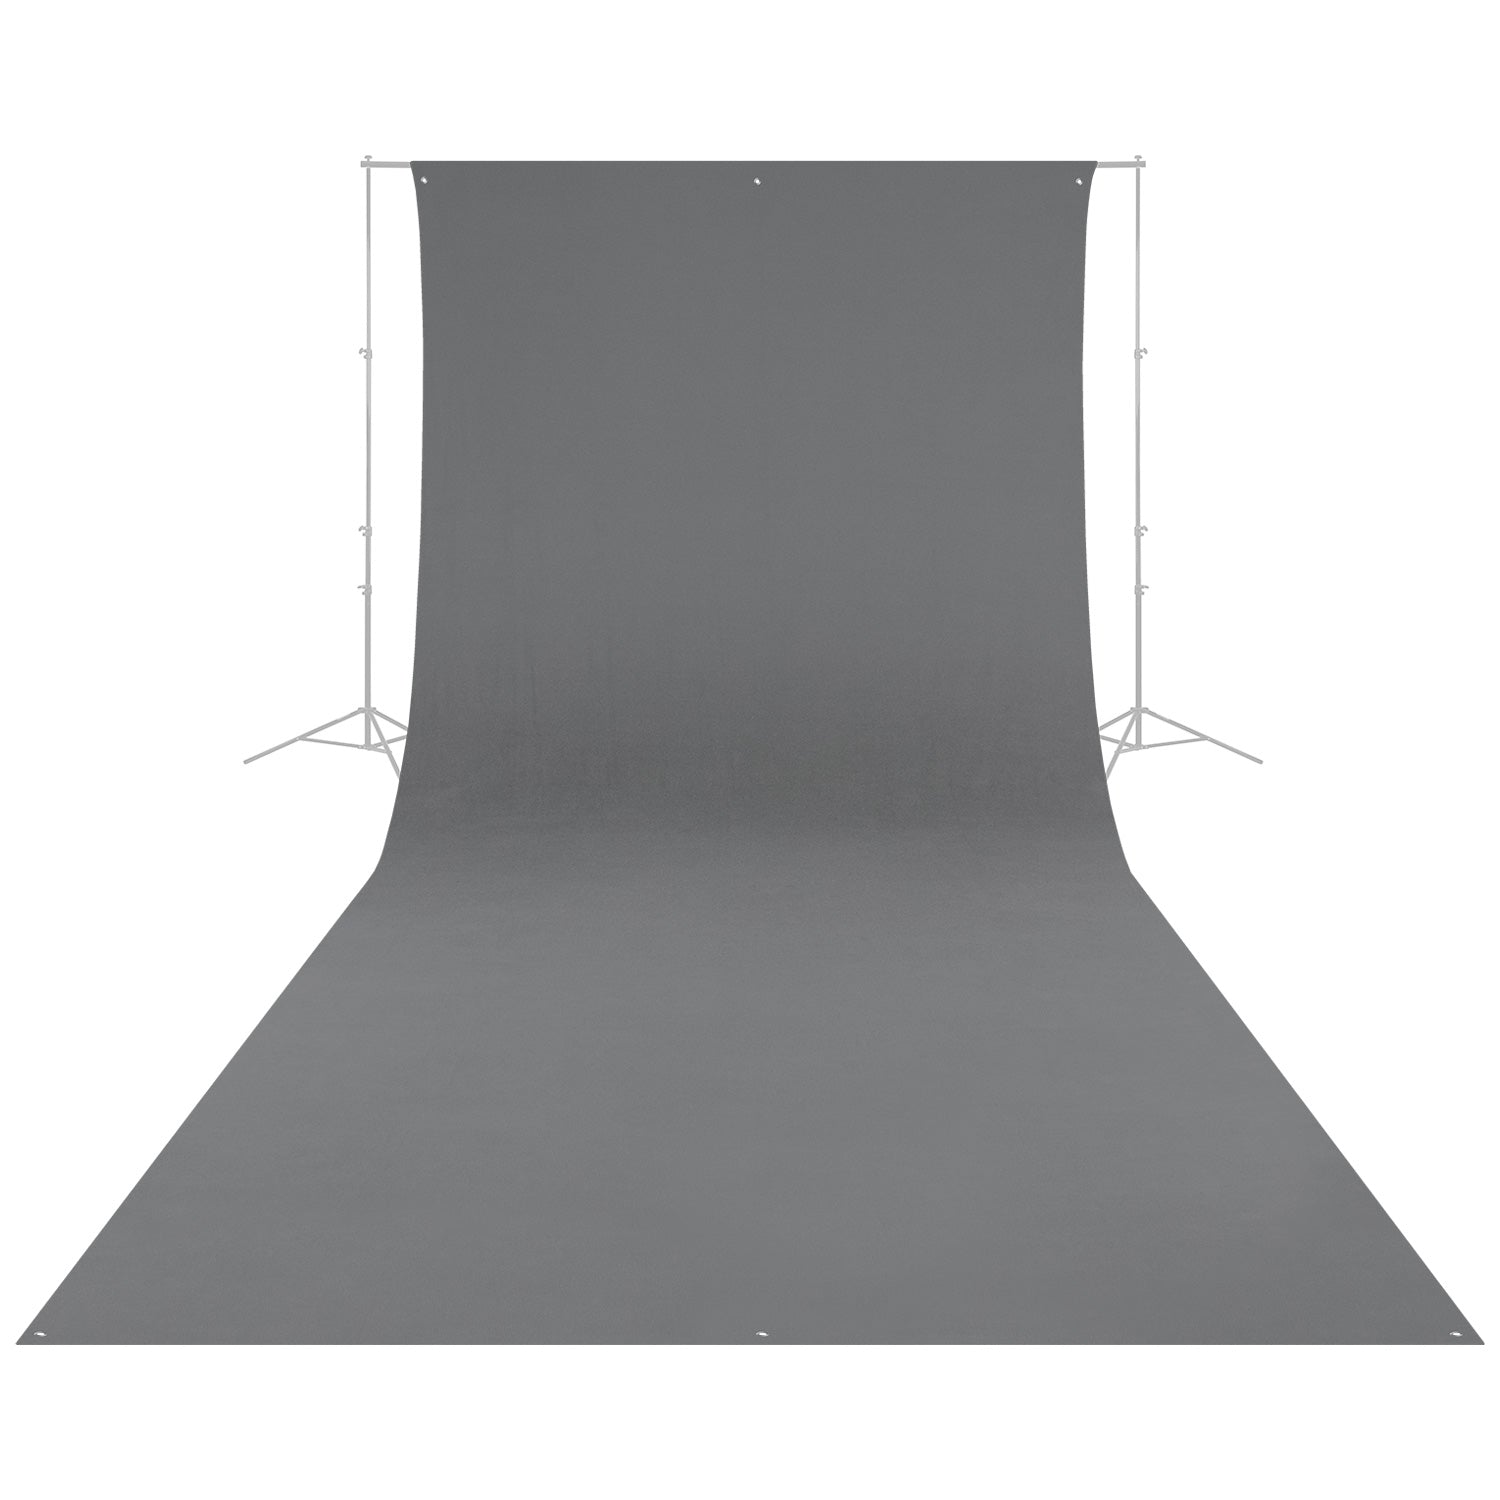 Wrinkle-Resistant Backdrop - Neutral Gray (9' x 20')